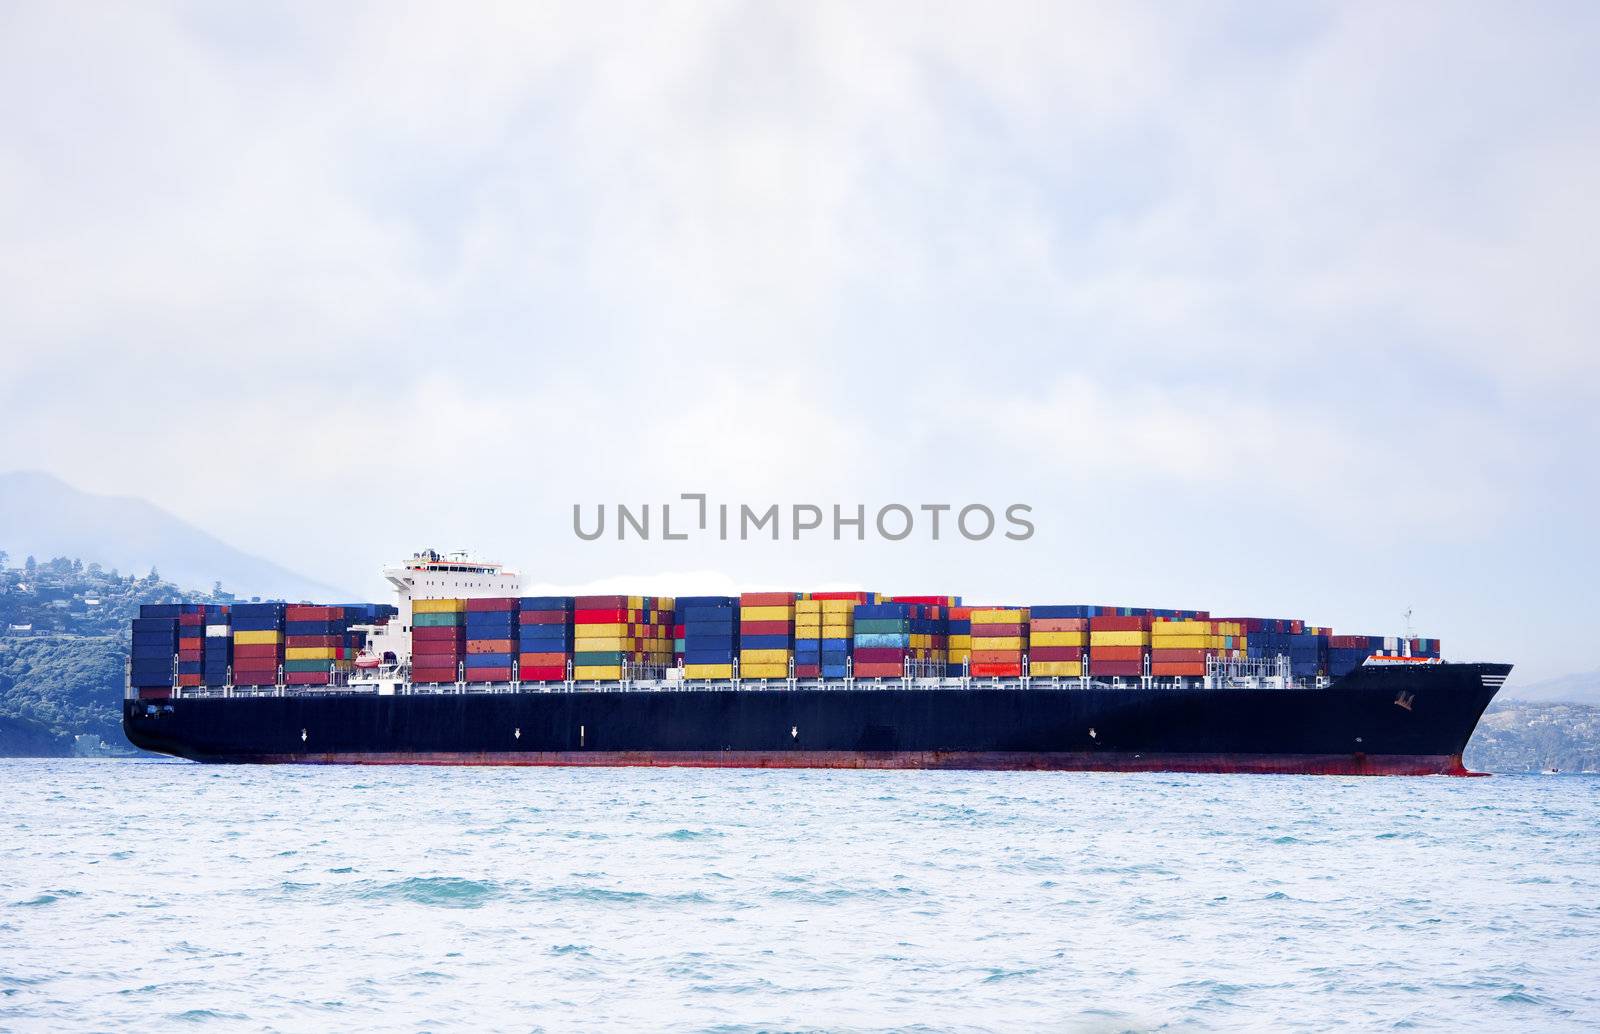 Large cargo ship in water carrying colorful shipping containers by jarenwicklund